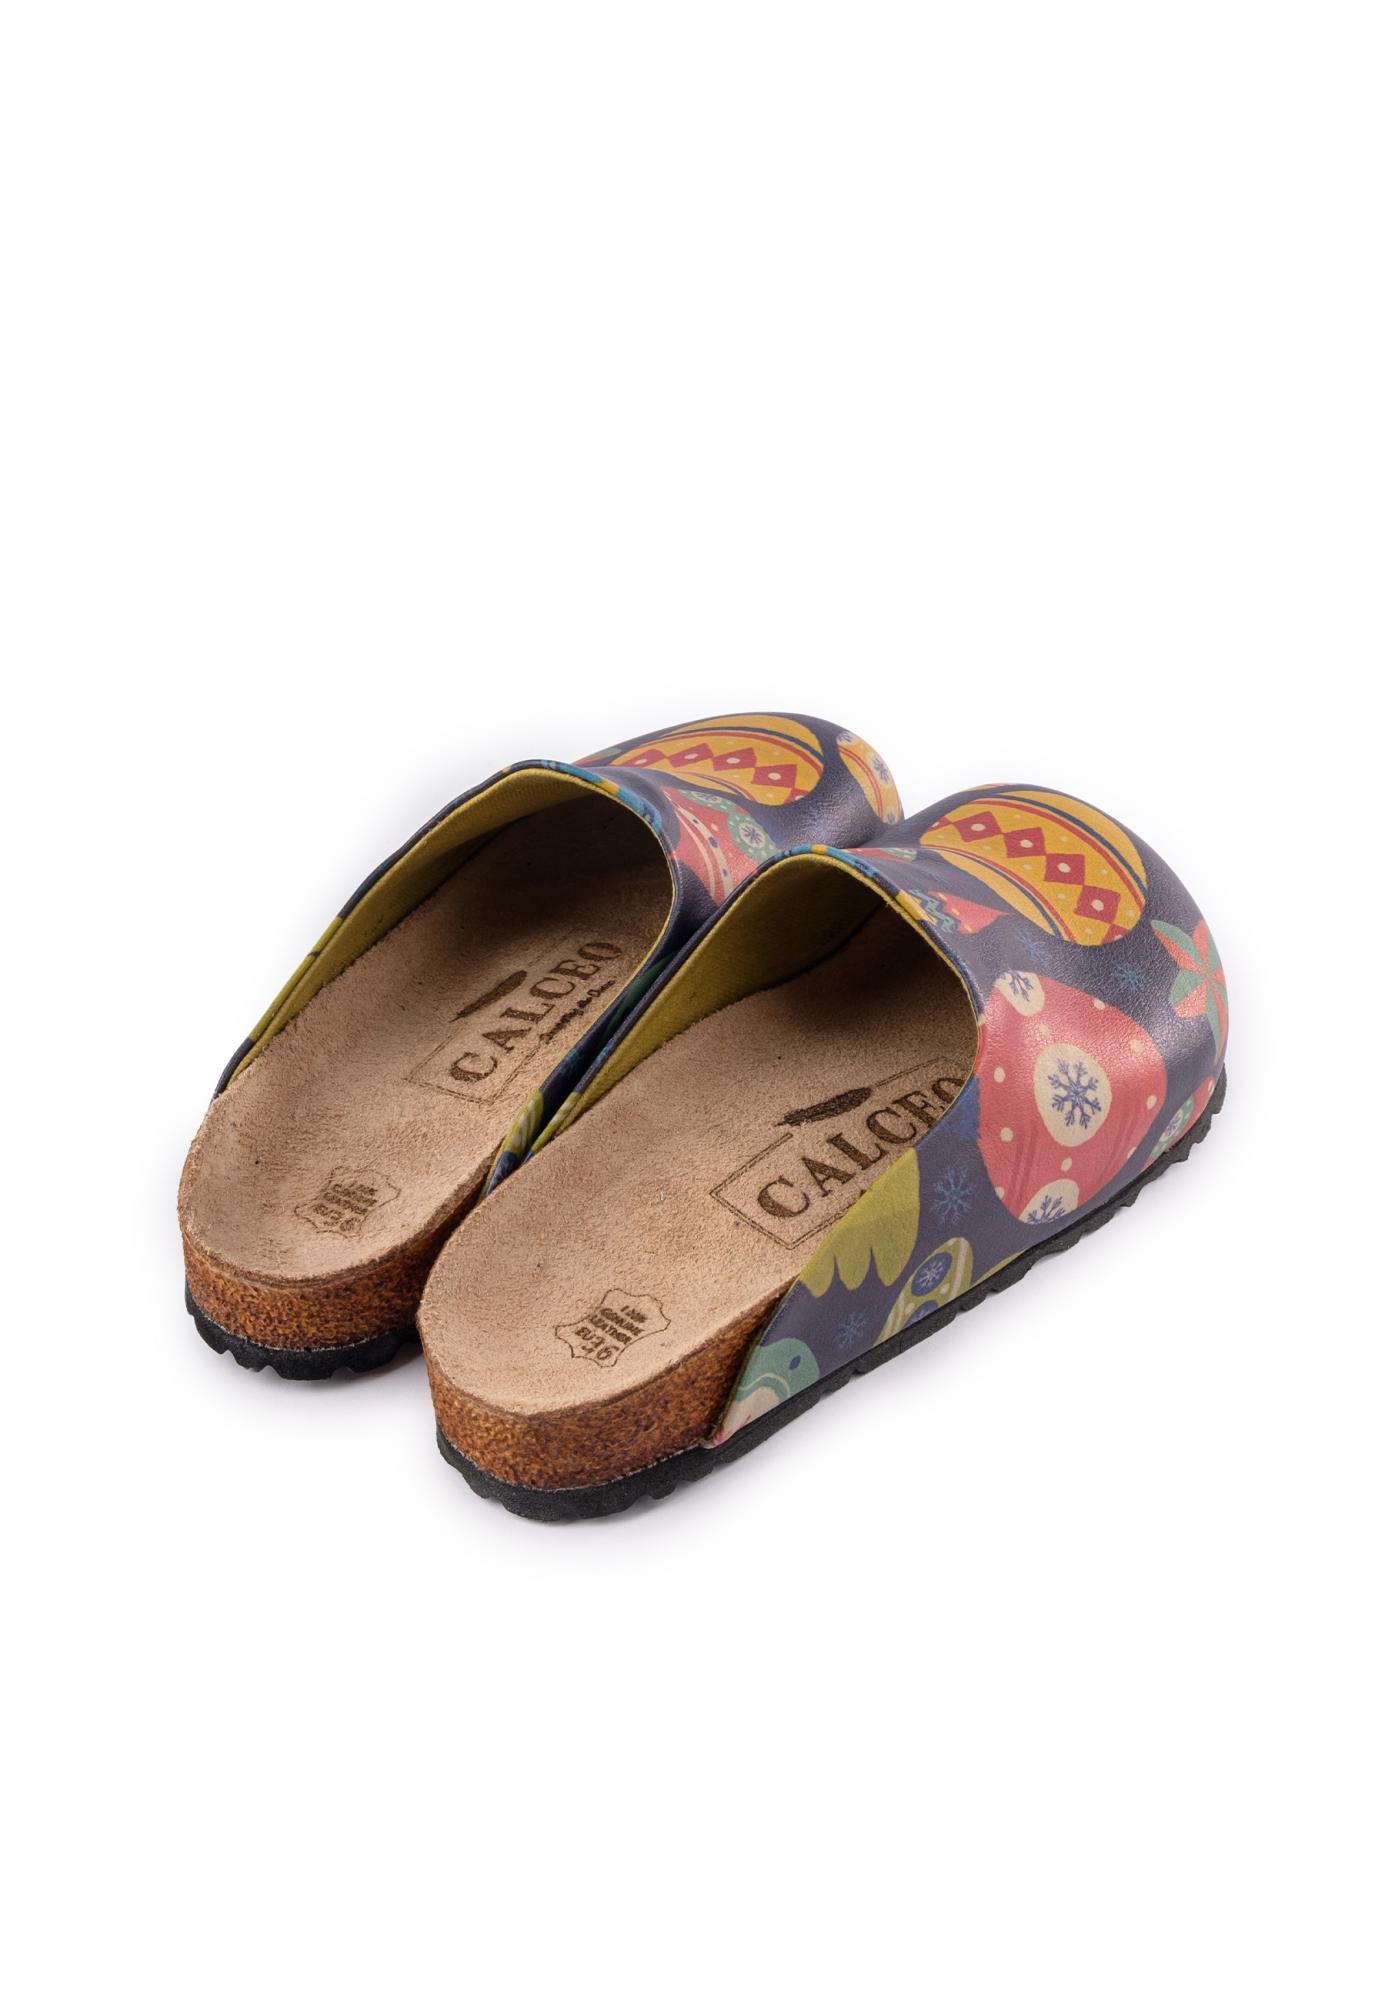 Patterned women clogs D271 - NEW YEAR - NAVY